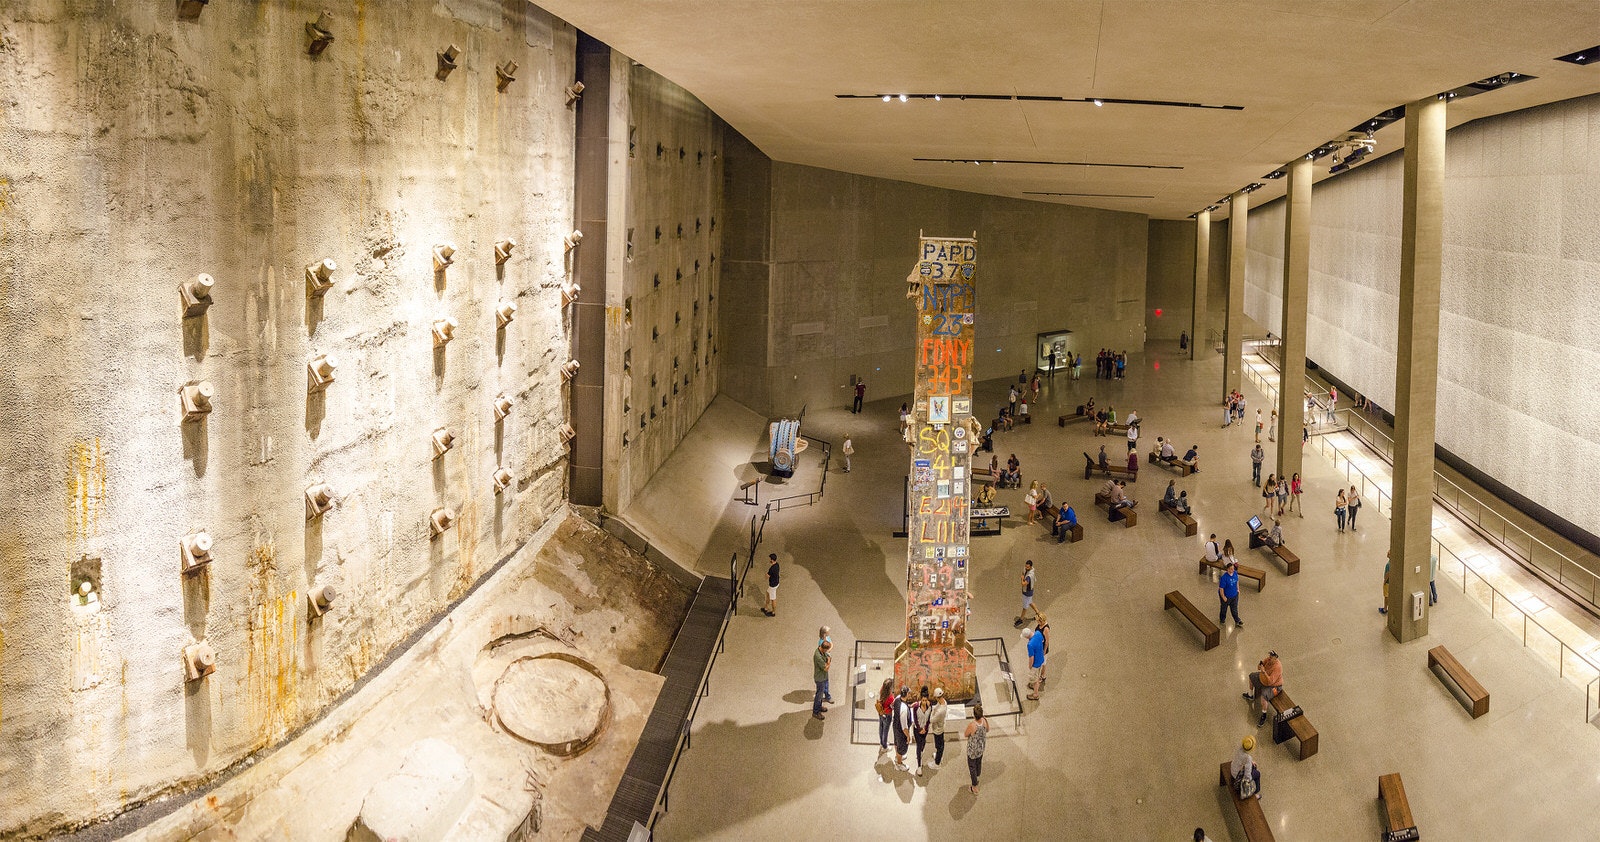 A subterranean concrete wall in the National September 11 Memorial Museum, New York City